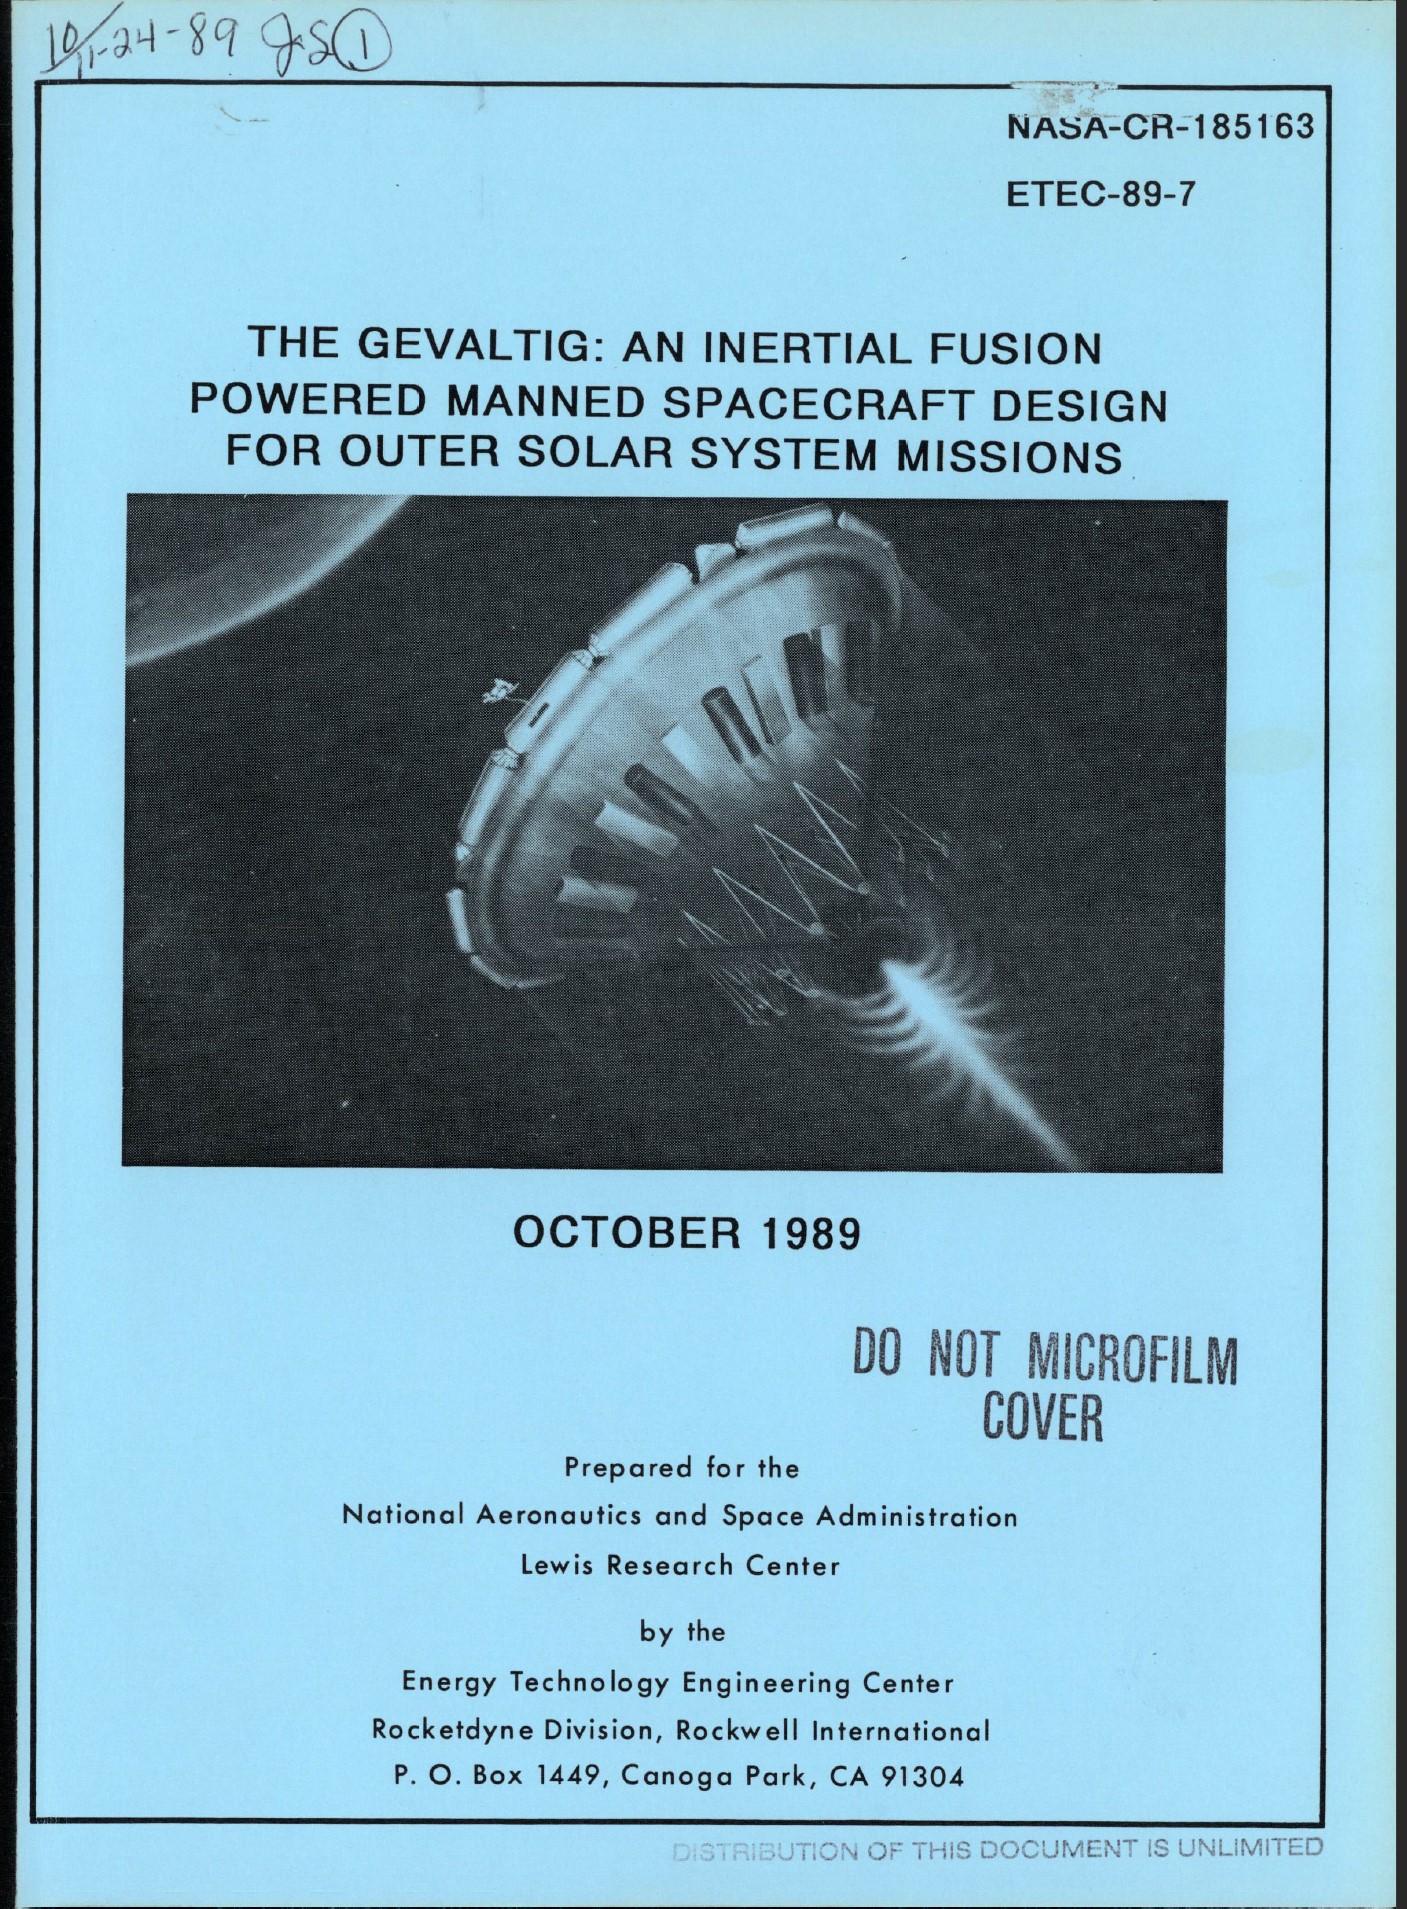 The cover of a 1989 NASA Lewis Research Center study of inertial confinement fusion propulsion.